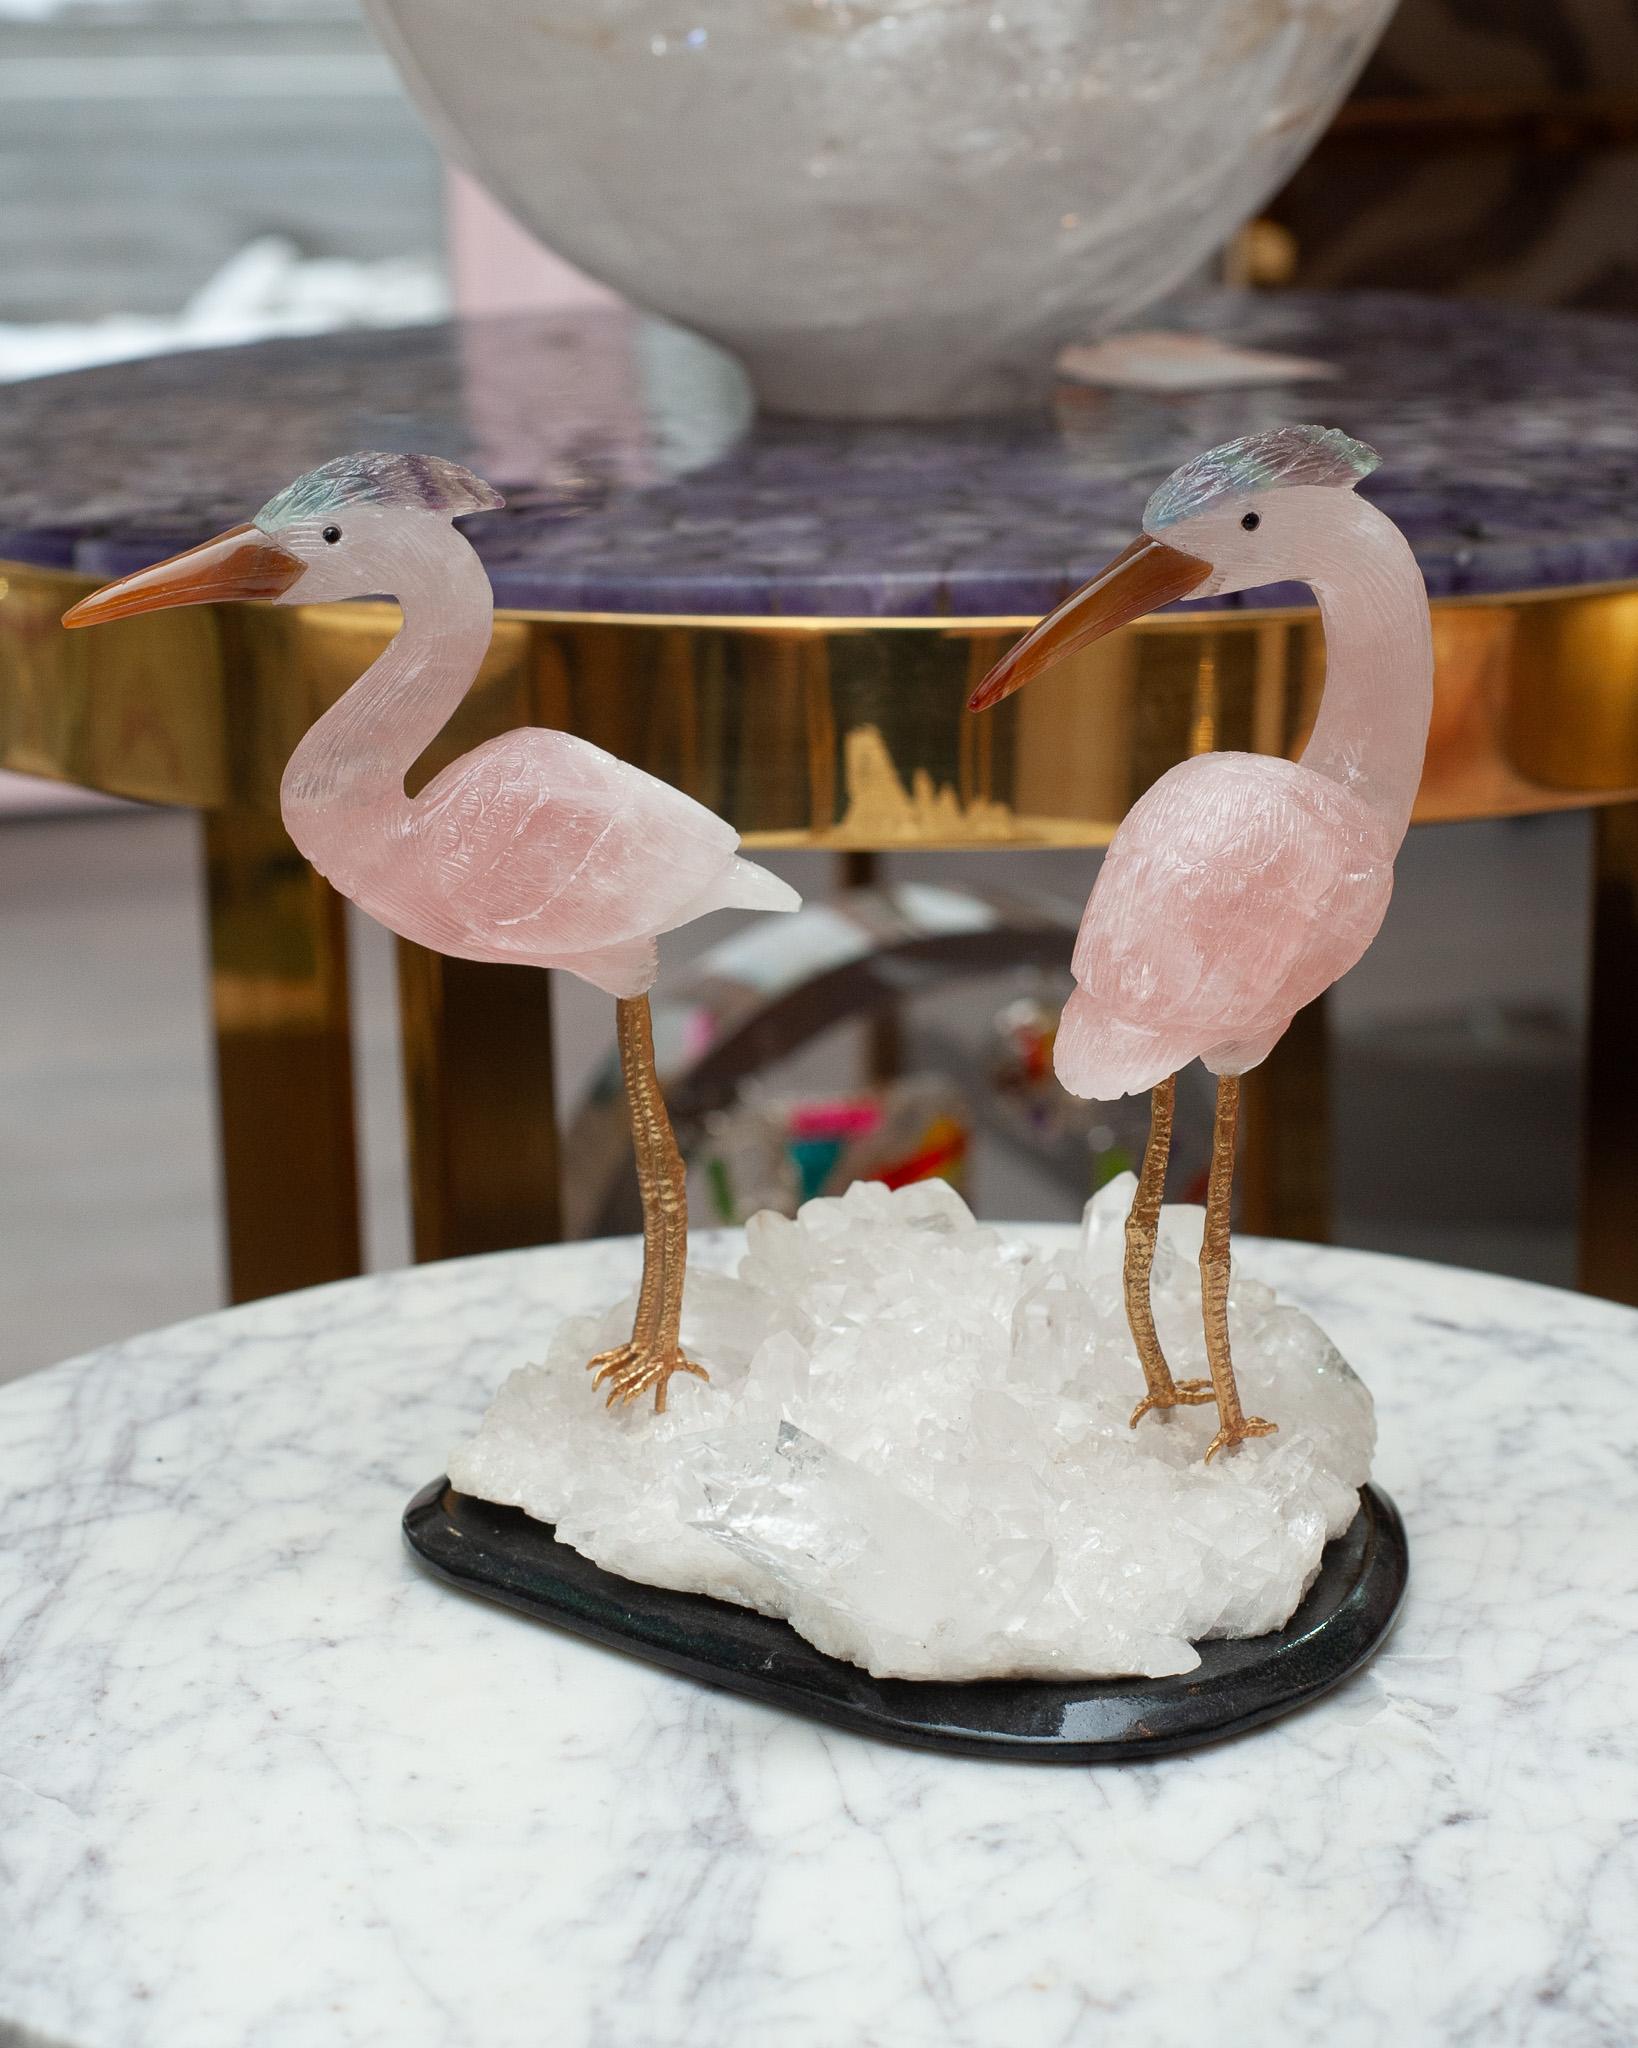 A beautiful hand carved semi precious rose quartz stone crane pair, with carnelian beaks, fluorite crests, and brass legs. The pair of cranes are mounted on a rock crystal quartz mineral specimen on a black marble base. These exotic birds are a